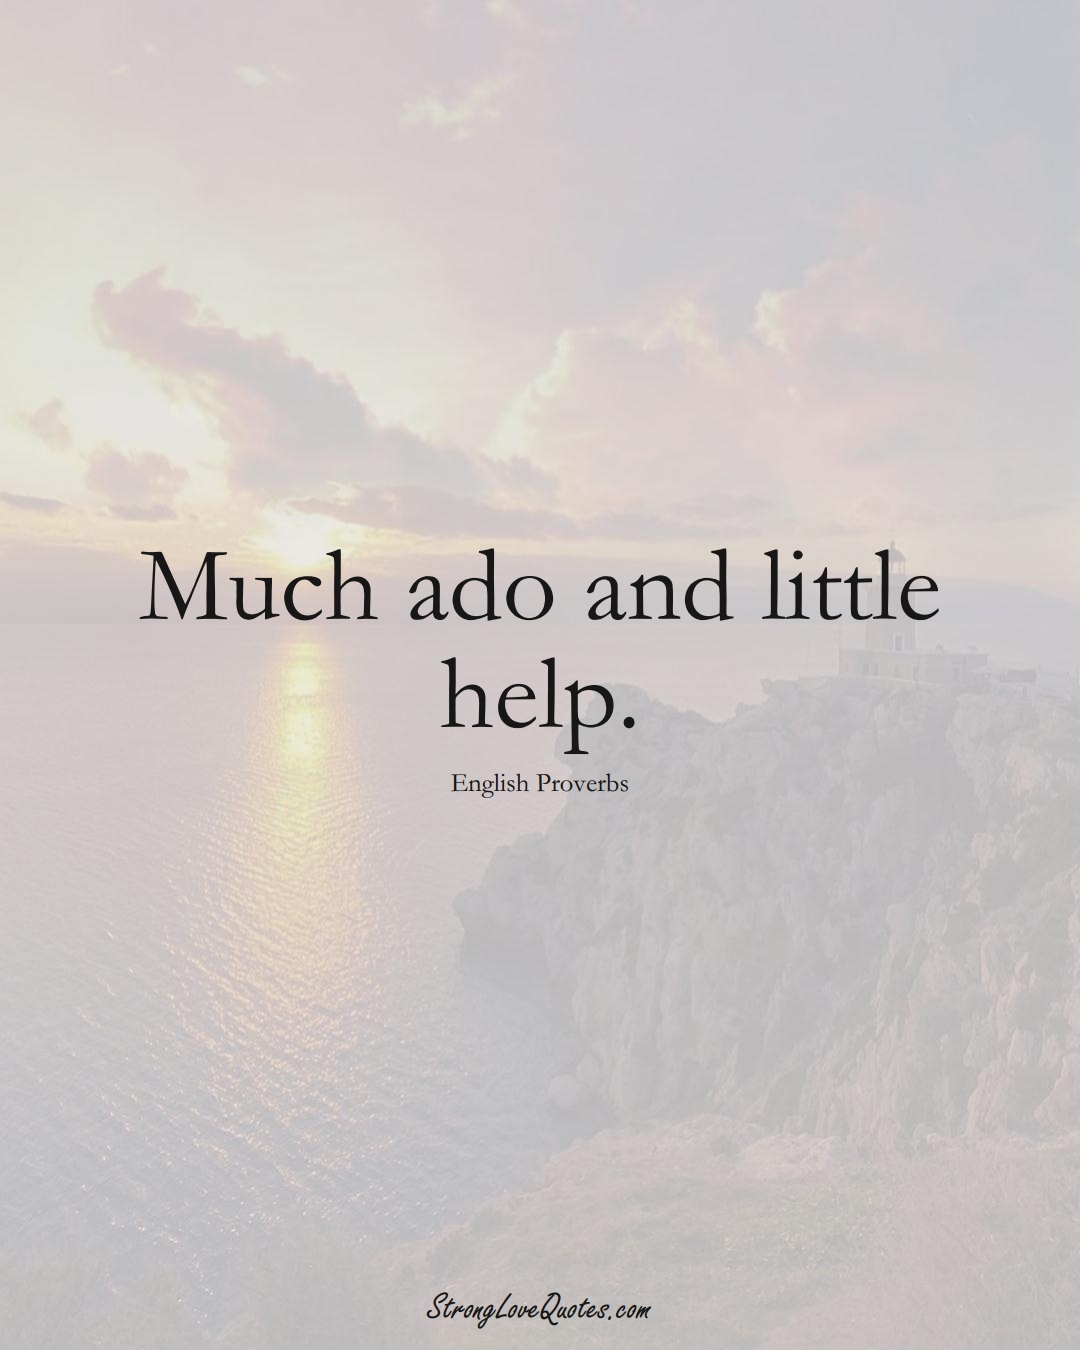 Much ado and little help. (English Sayings);  #EuropeanSayings